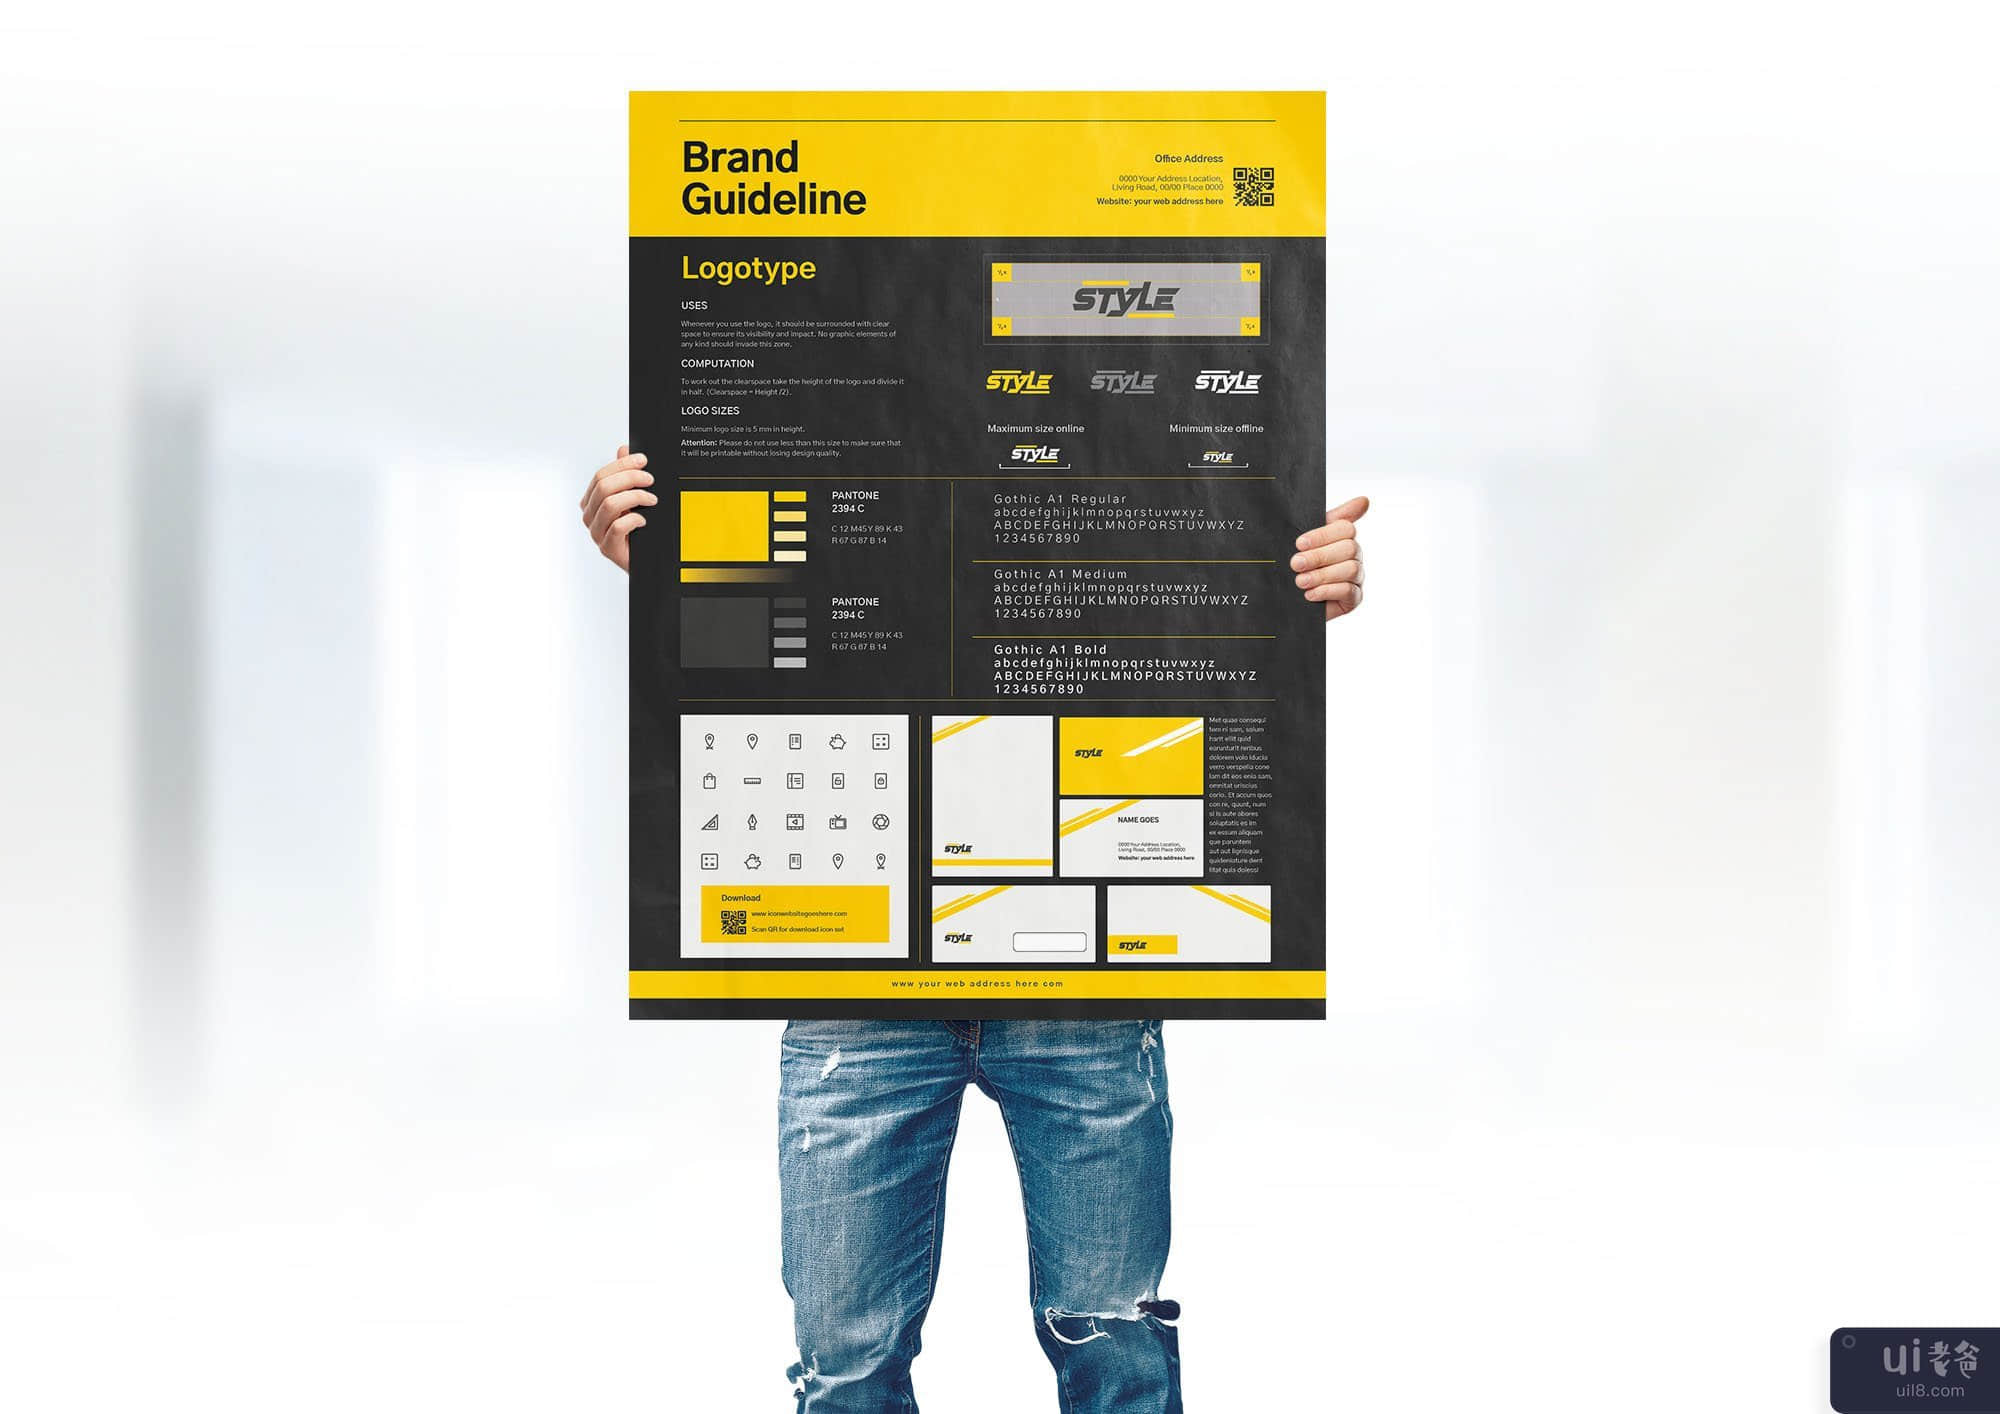 A3 品牌指南海报 Din A3 品牌指南海报(A3 Brand Guideline poster Din A3 Brand Guideline poster)插图6